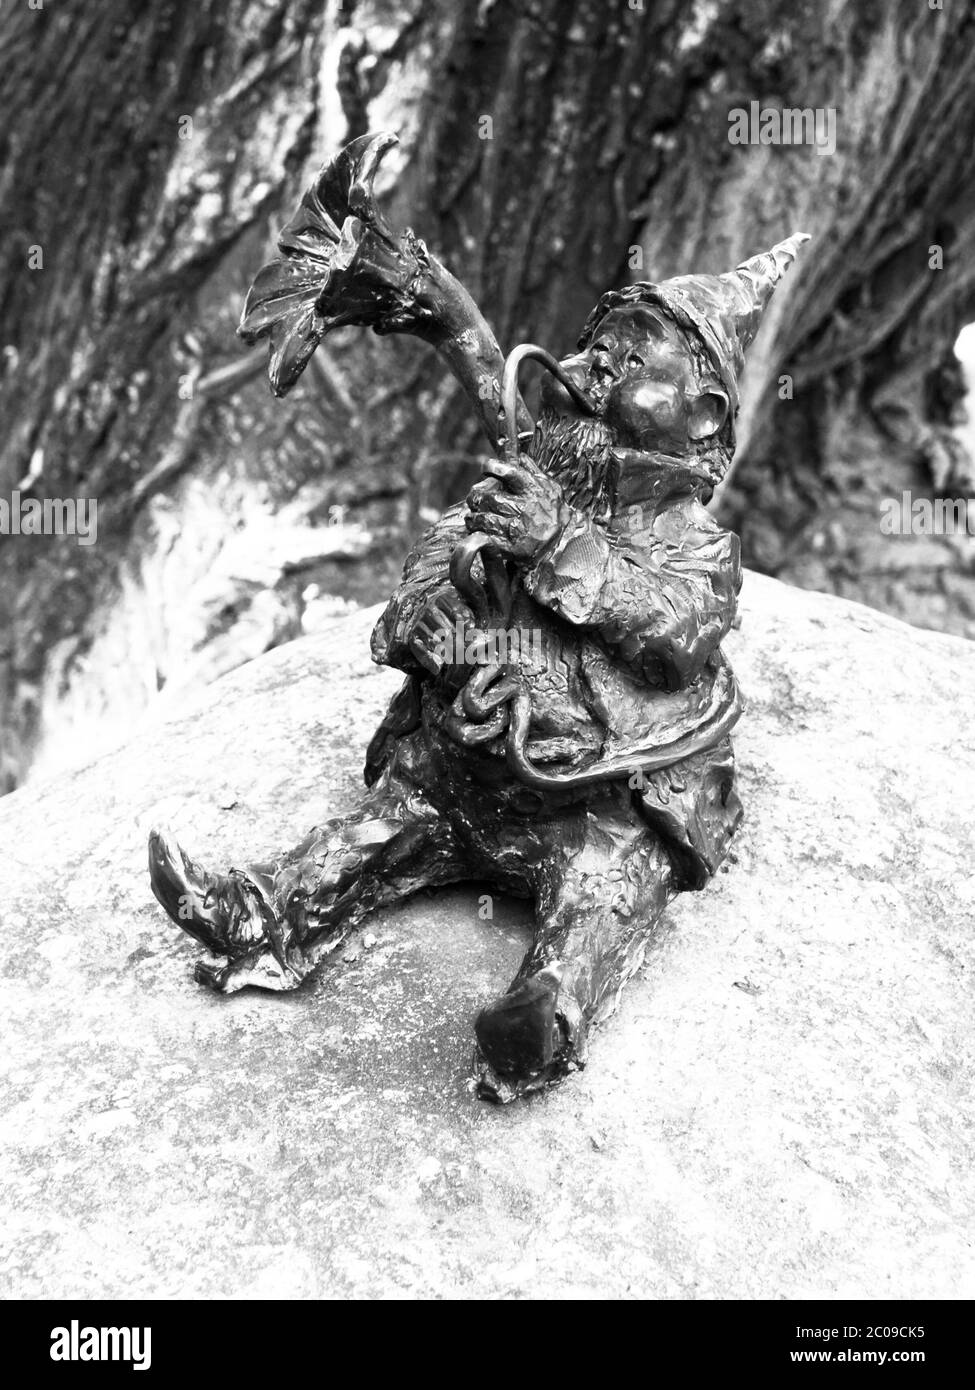 WROCLAW, POLAND - CIRCA 2014: Dwarf playing trombone in Wroclaw botanical garden, Poland, circa 2014. Dwarfs are small figurines hidden on different places in Wroclaw. Black and white image. Stock Photo